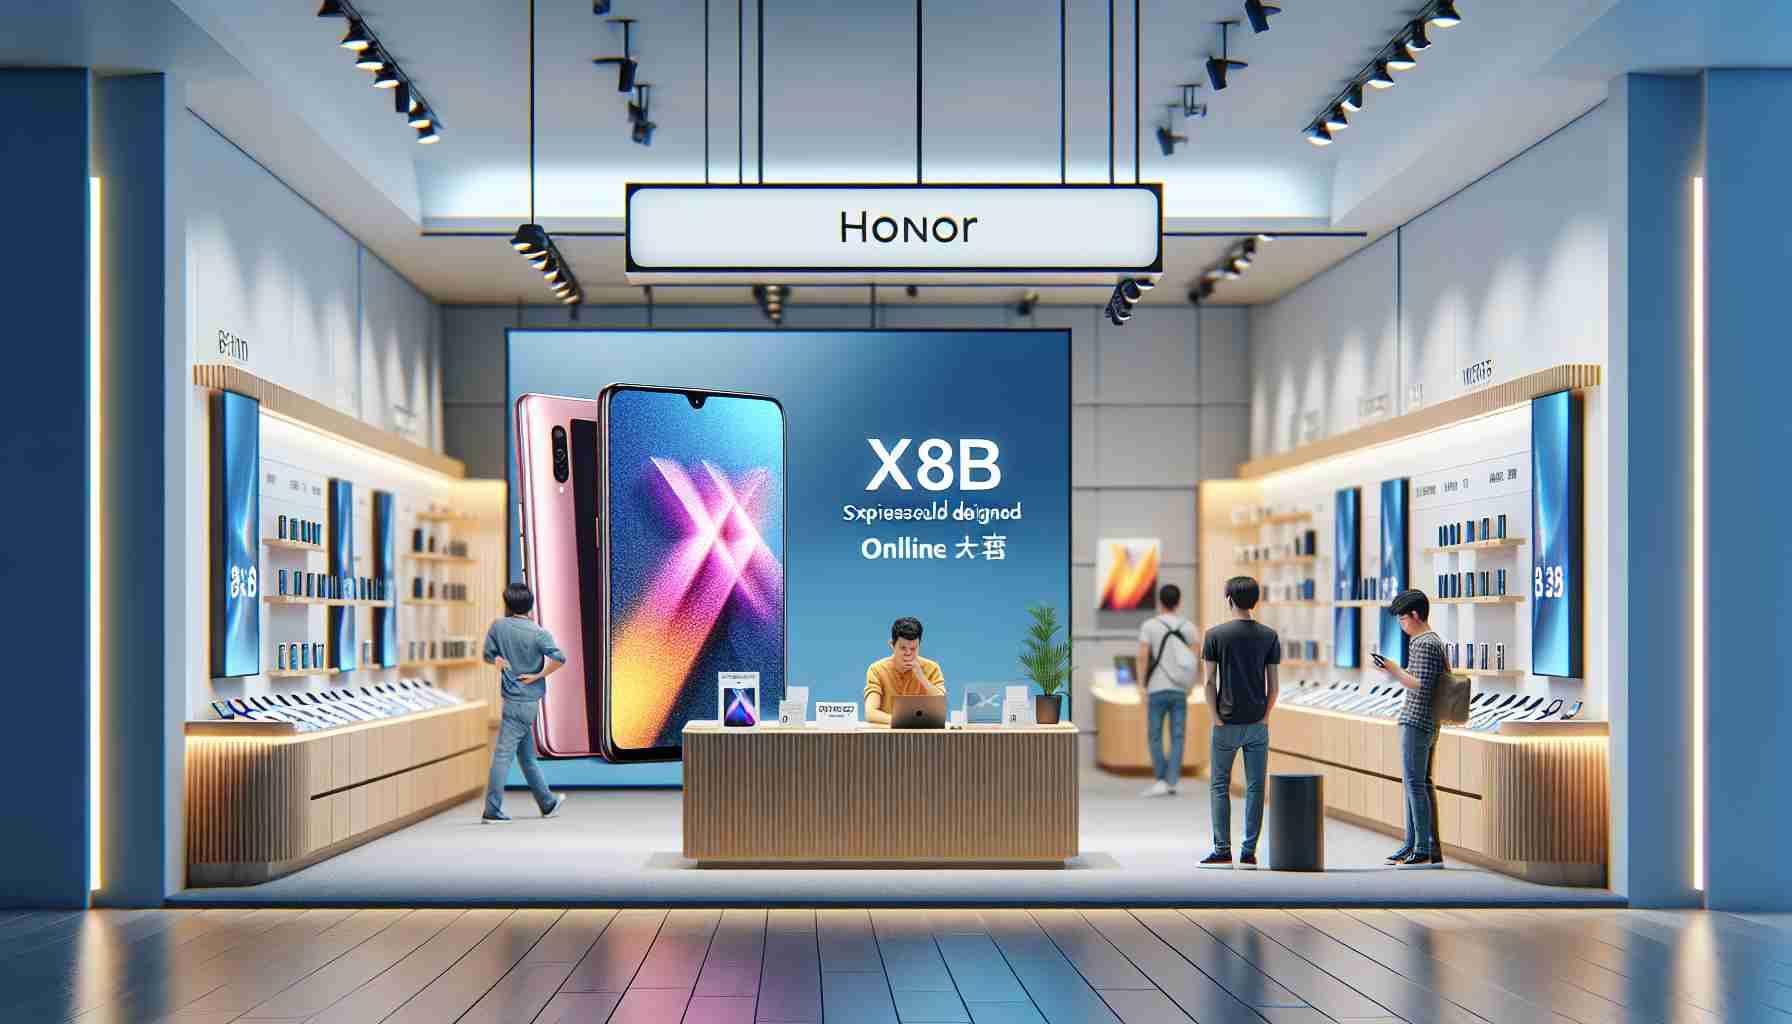 Experience Excellence with HONOR X8b at MTS Stores and Online